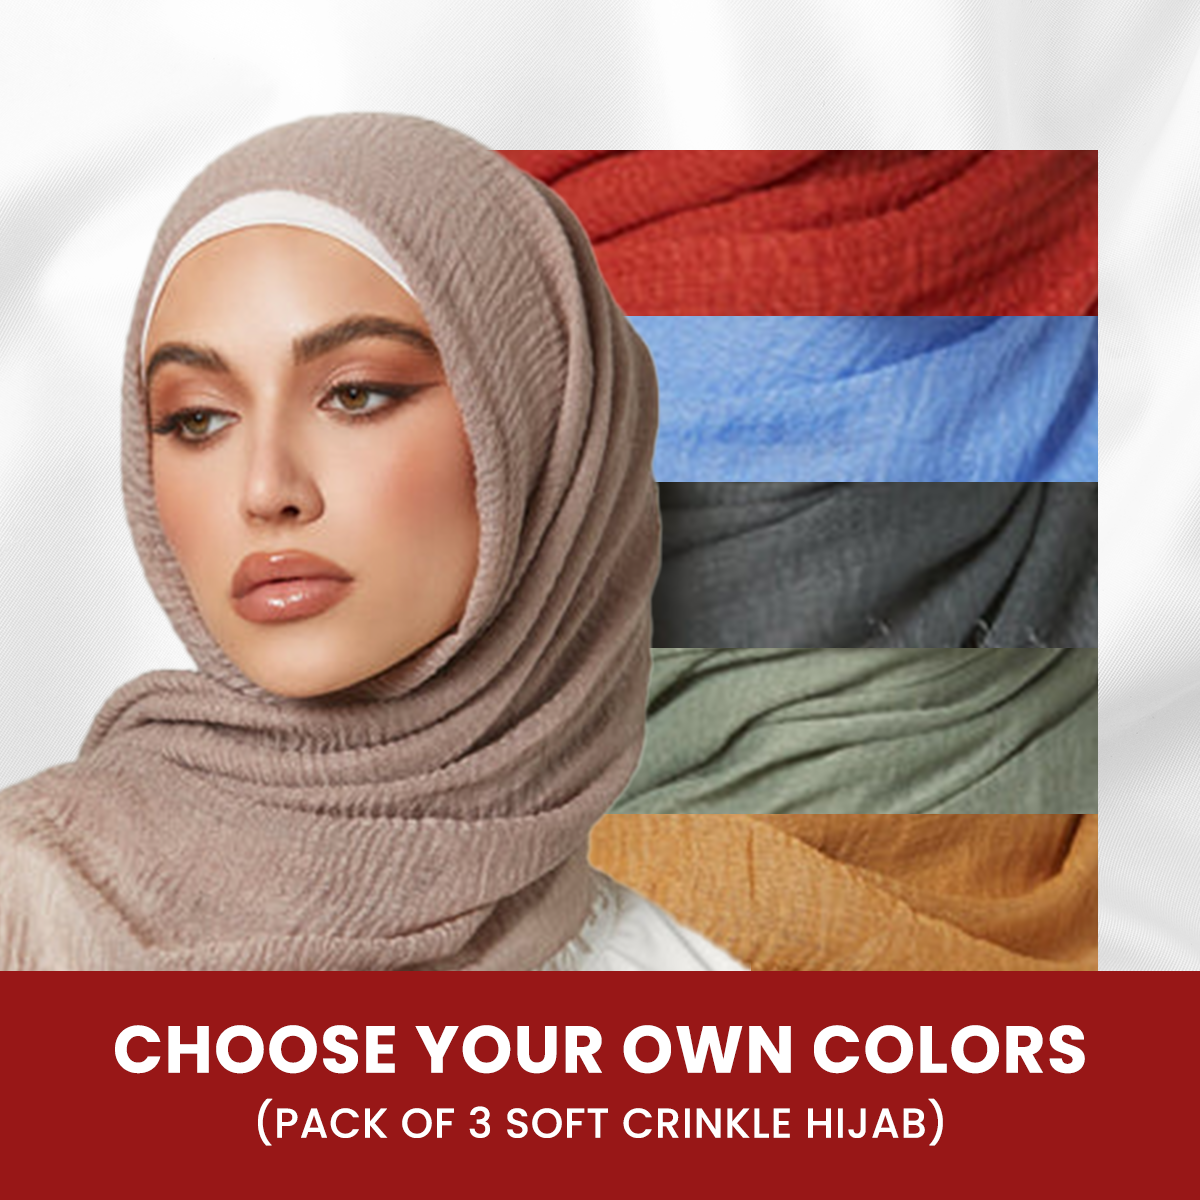 Pack of 3 Soft Crinkle Hijabs